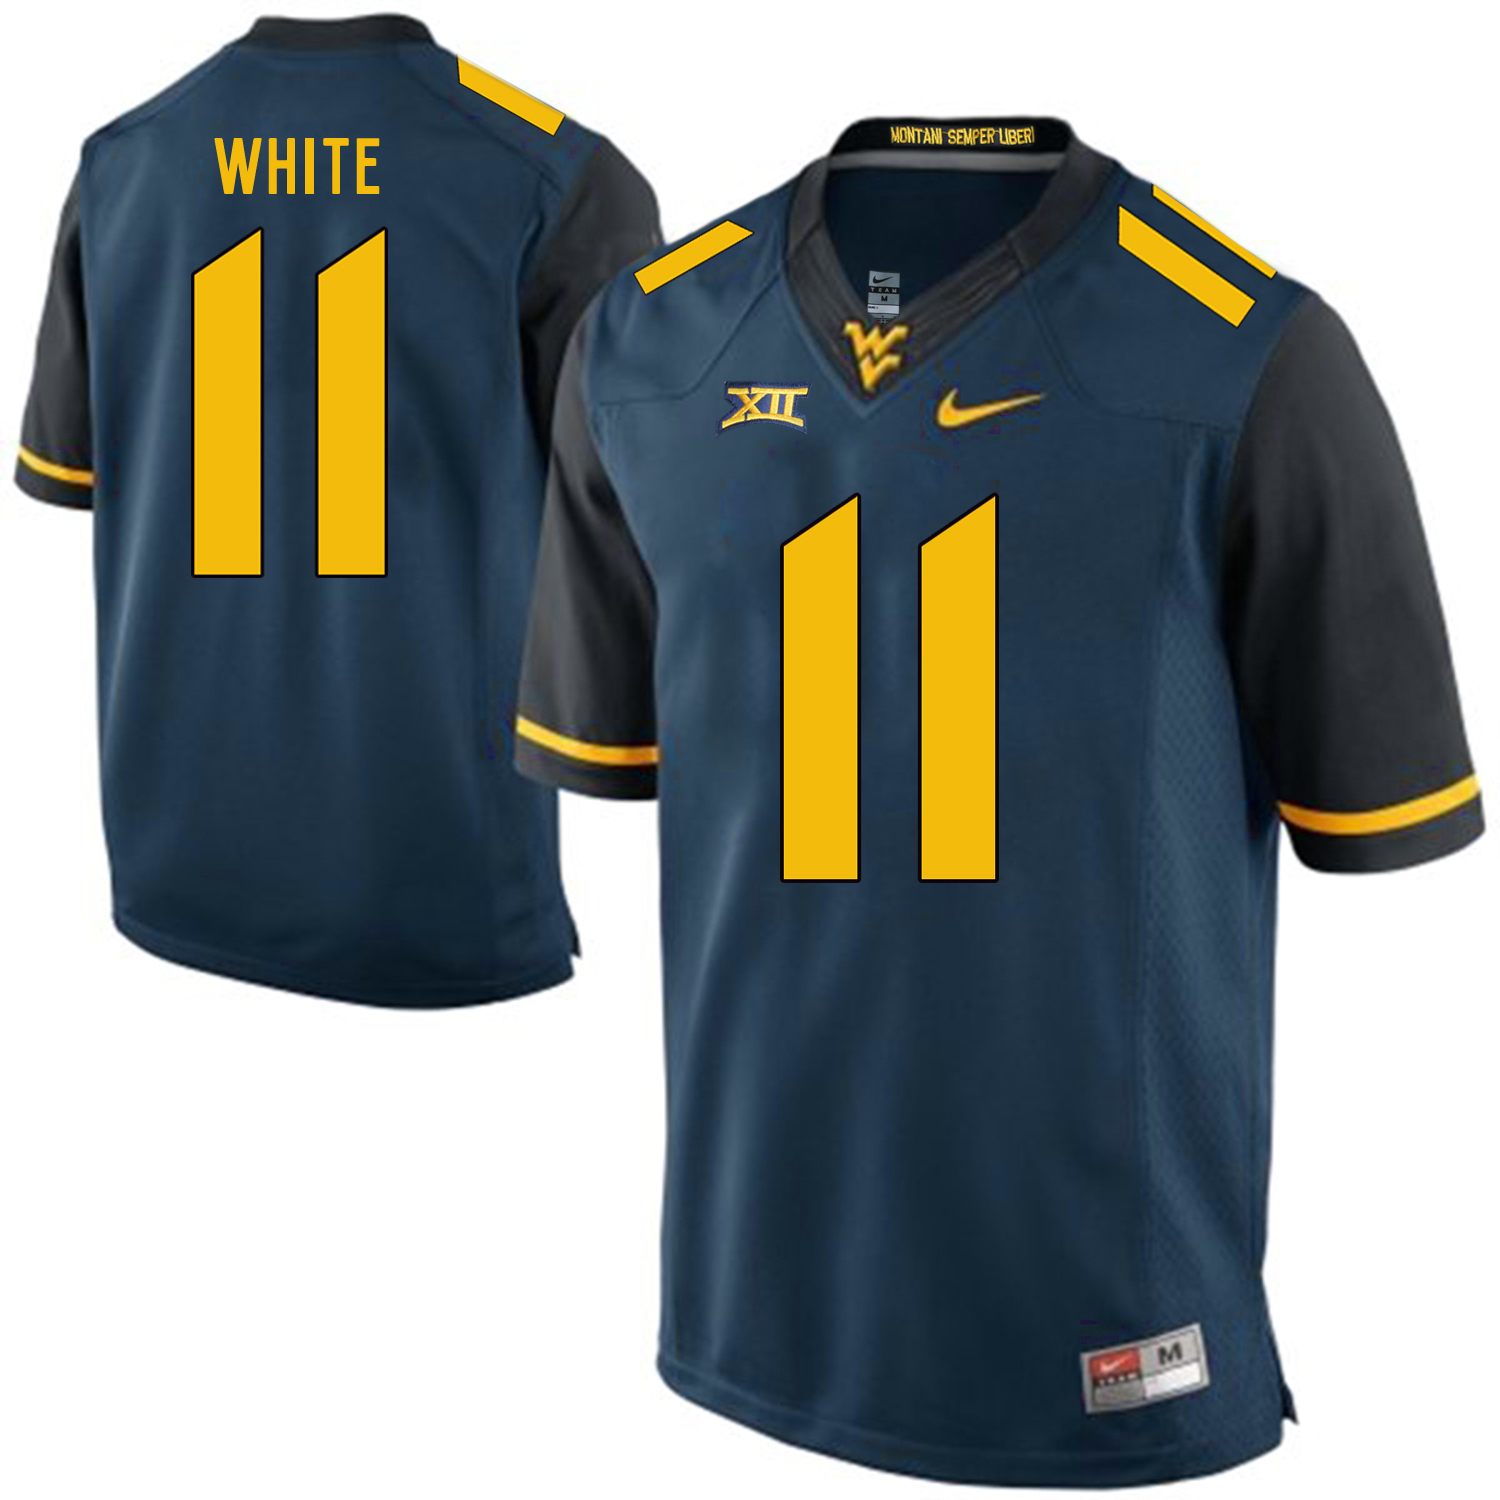 West Virginia Mountaineers 11 Kevin White Navy College Football Jersey